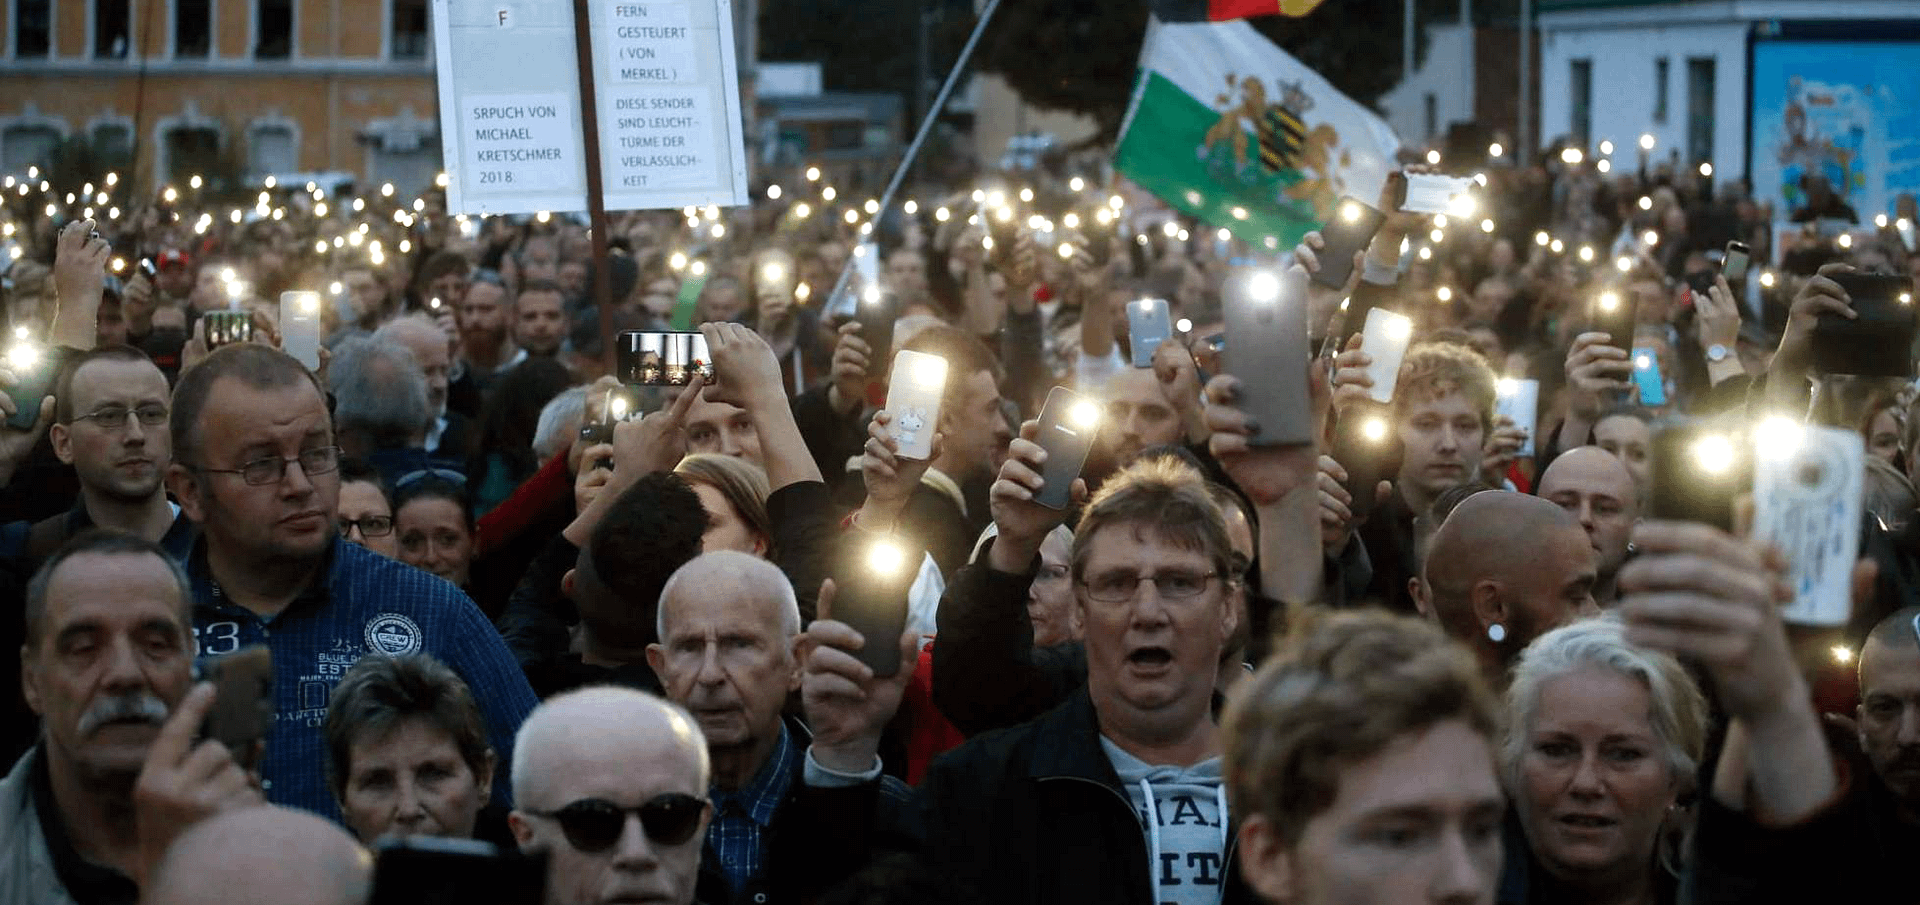 Fascist protersters in Chemnitz, Germany